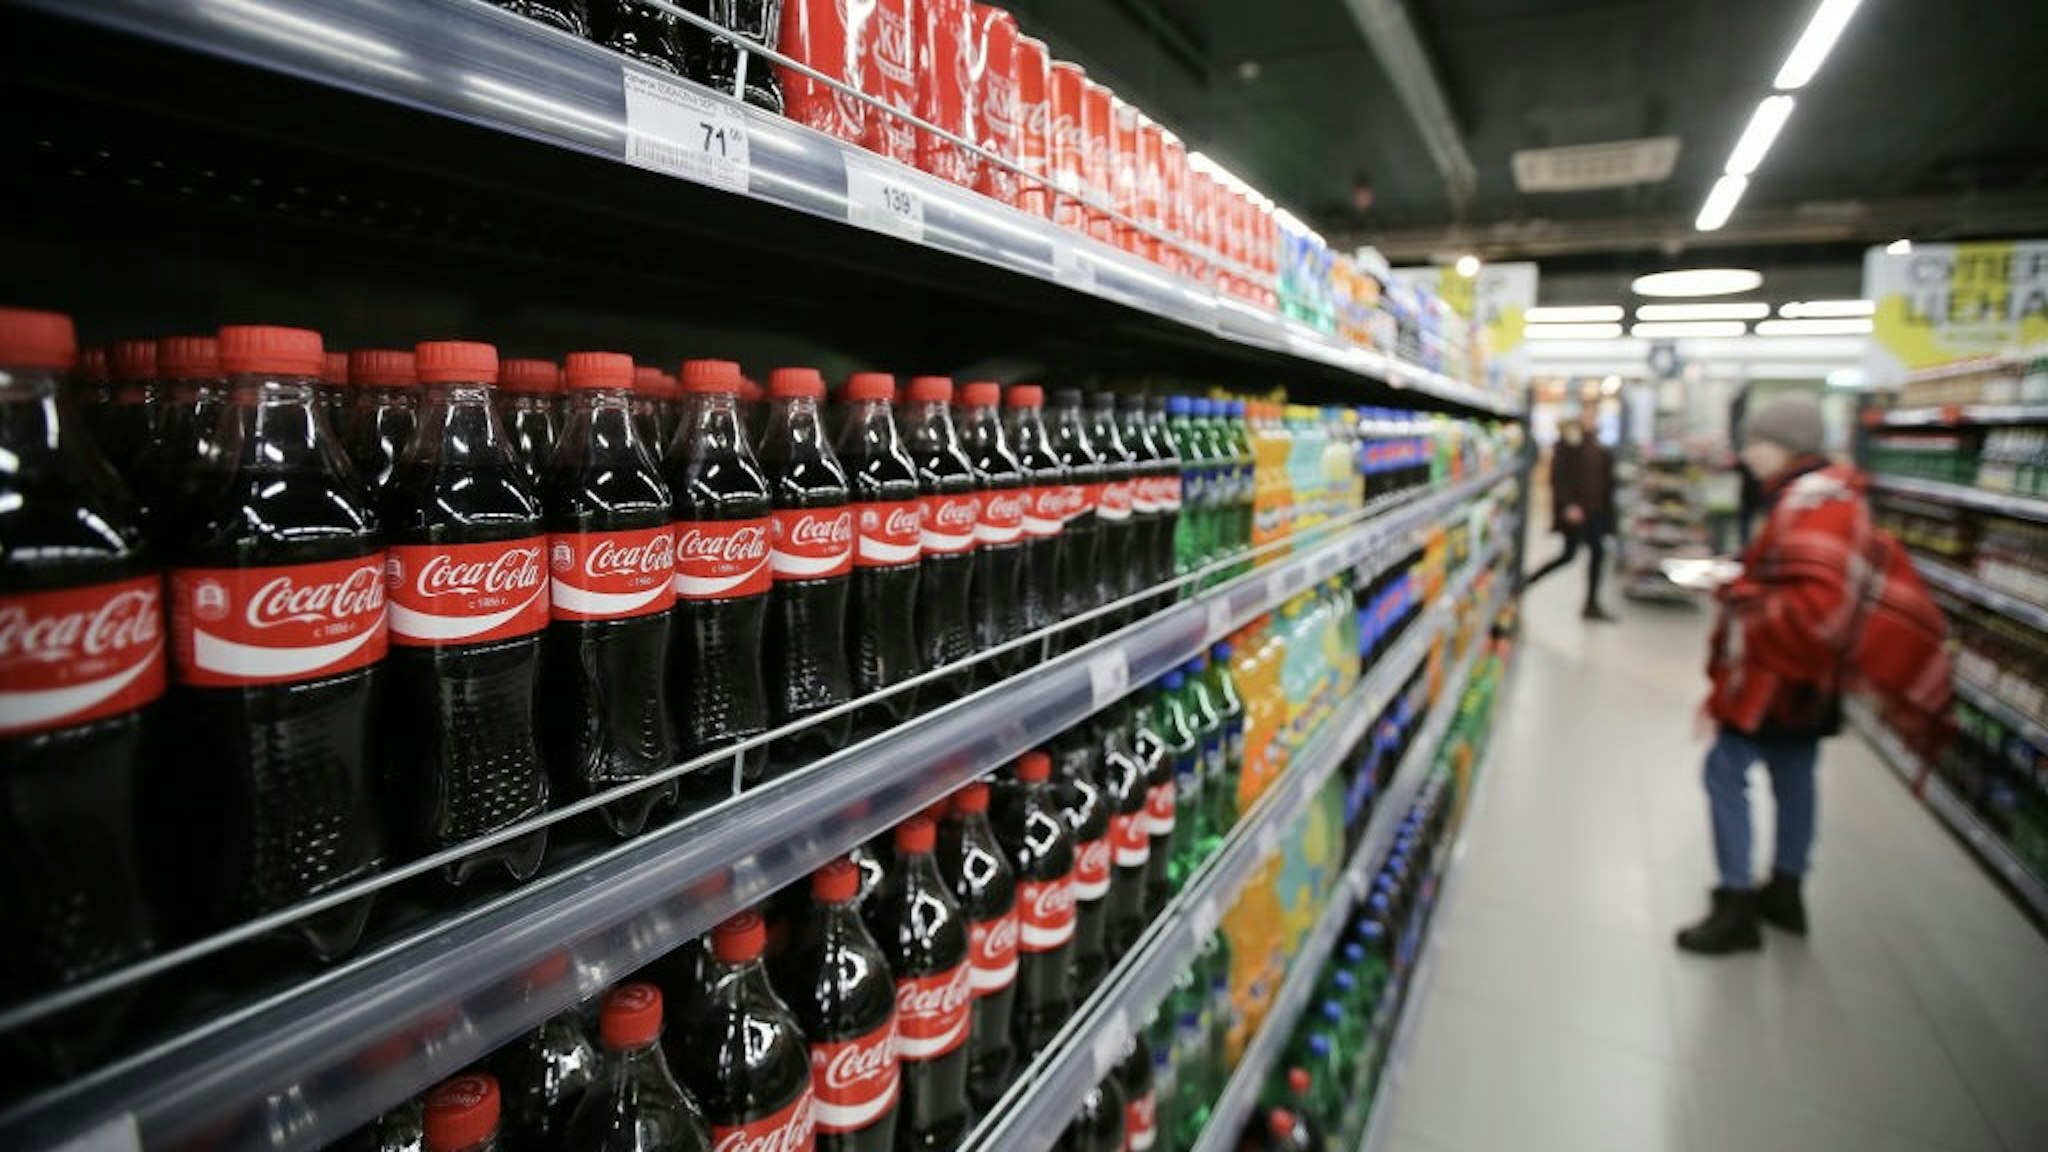 Retail Economy Inside An X5 Retail Group NV Supermarket As Russia Nears End Of Recession A customer browses a display of soft drinks including Coca-Cola Co. products inside a Perekrestok supermarket, operated by X5 Retail Group NV in Moscow, Russia, on Wednesday, Feb. 8, 2017. X5 says its interested in technologies for online payments in stores, personalized promotions based on big data and using robots in logistics. Photographer: Andrey Rudakov/Bloomberg via Getty Images Bloomberg / Contributor